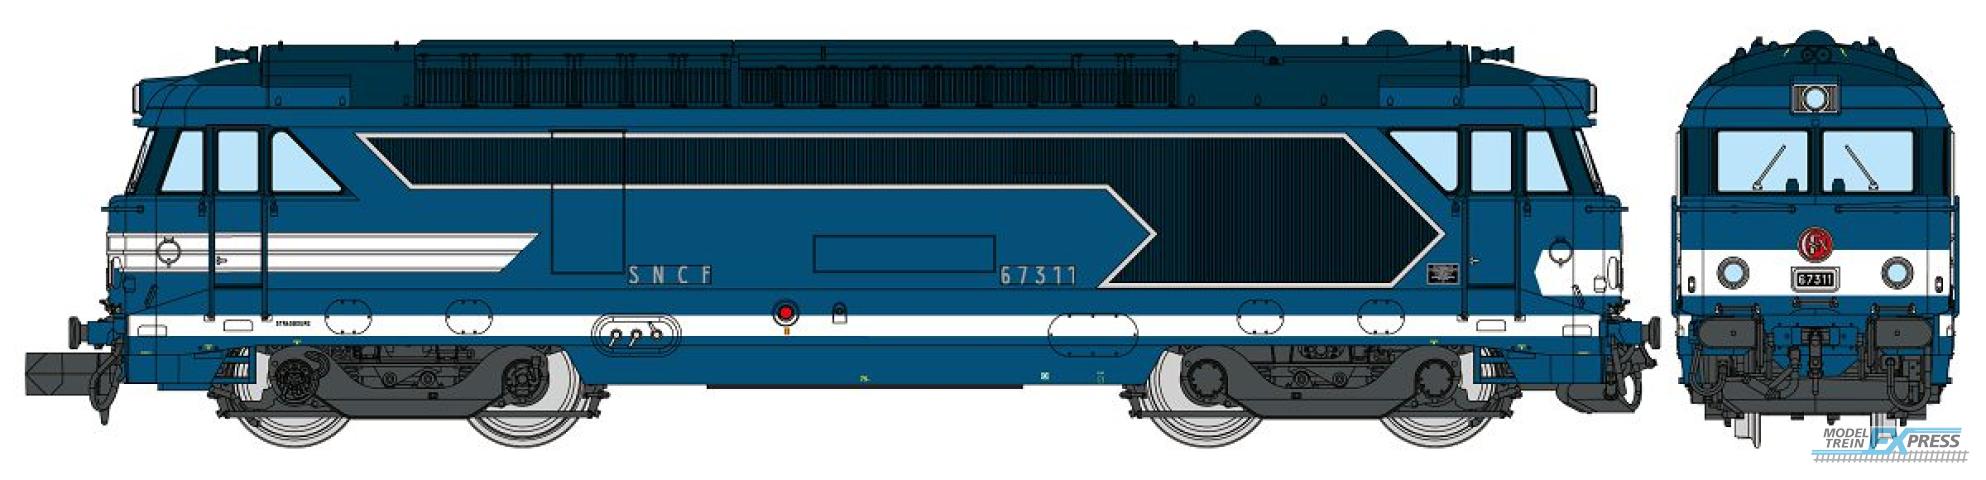 REE models NW-325 BB 67311 Blue livery with raised road, number plates, STRASBOURG, Era III-IV ANALOG